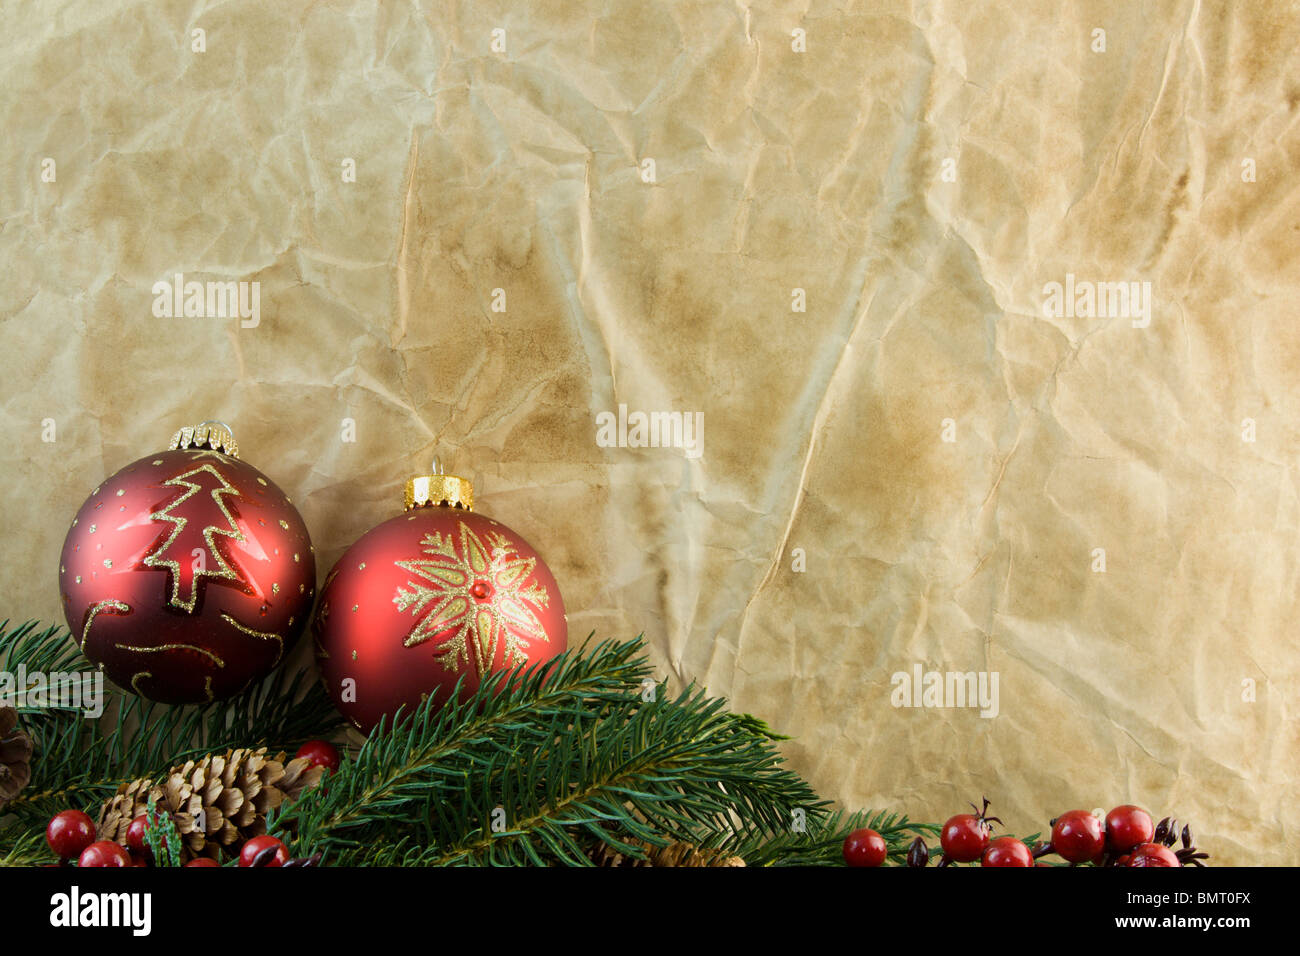 two red Christmas ornaments, fir branch with old fashioned antique paper background and copyspace Stock Photo